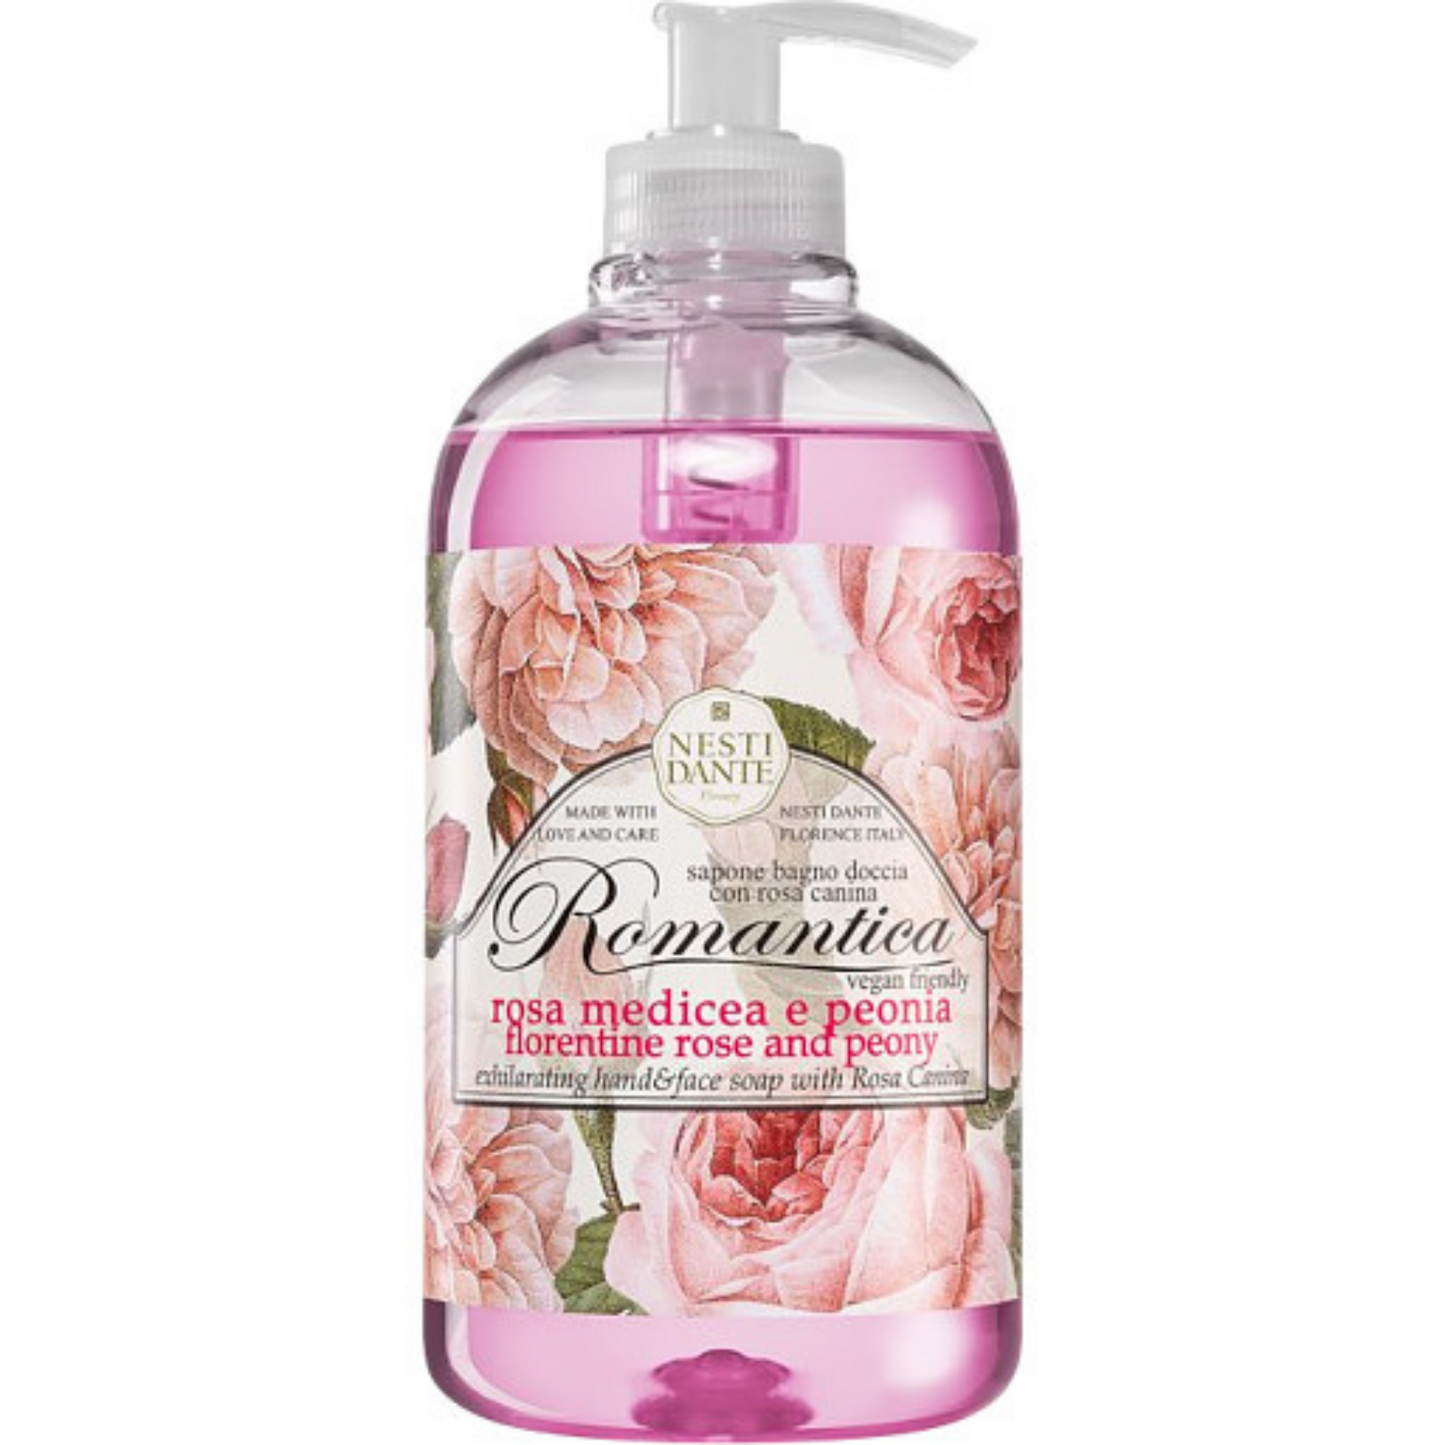 Primary Image of Florentine Rose and Peony Hand and Face Soap